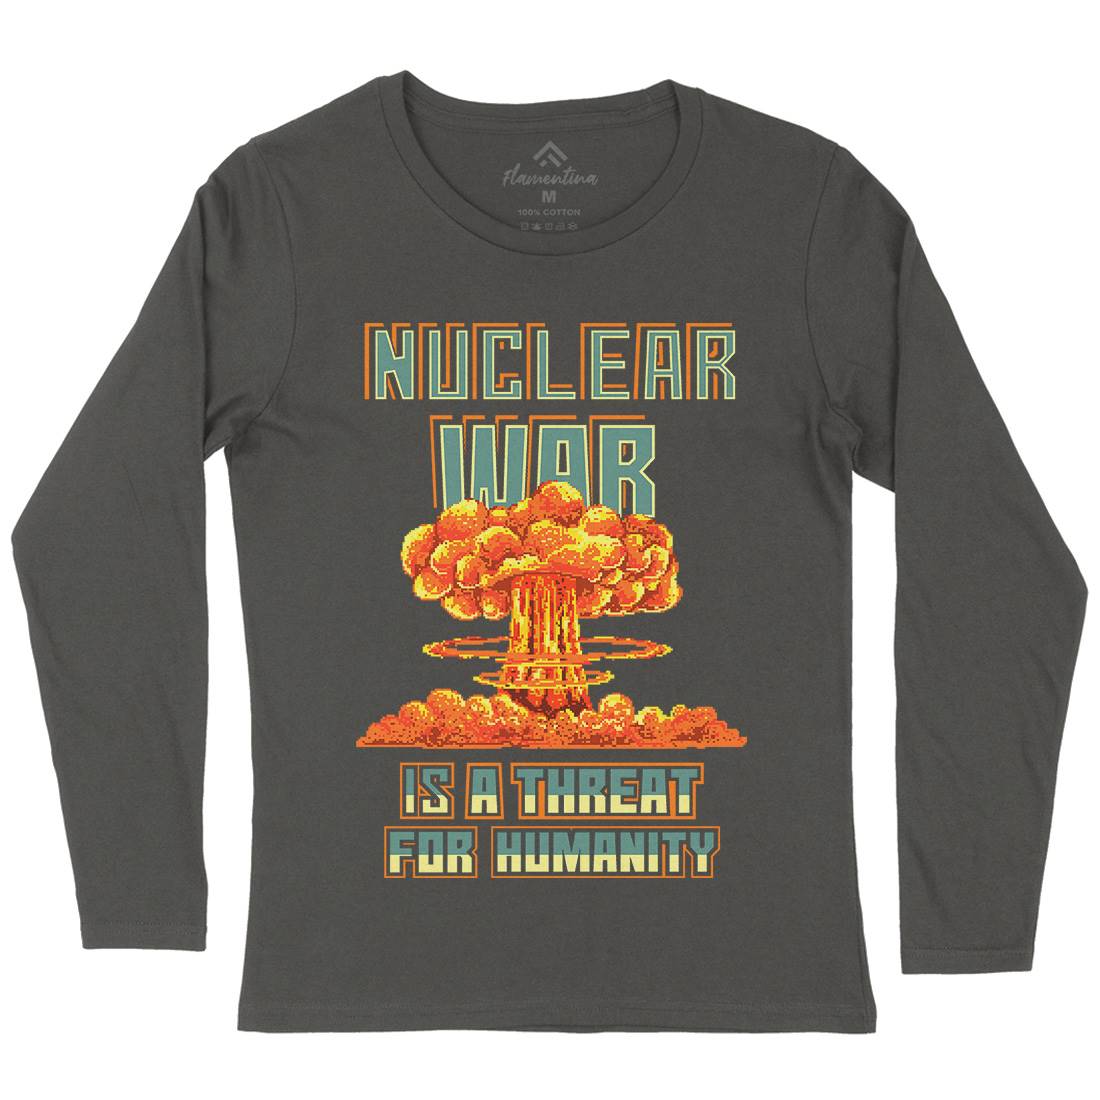 Nuclear War Is A Threat For Humanity Womens Long Sleeve T-Shirt Army B941